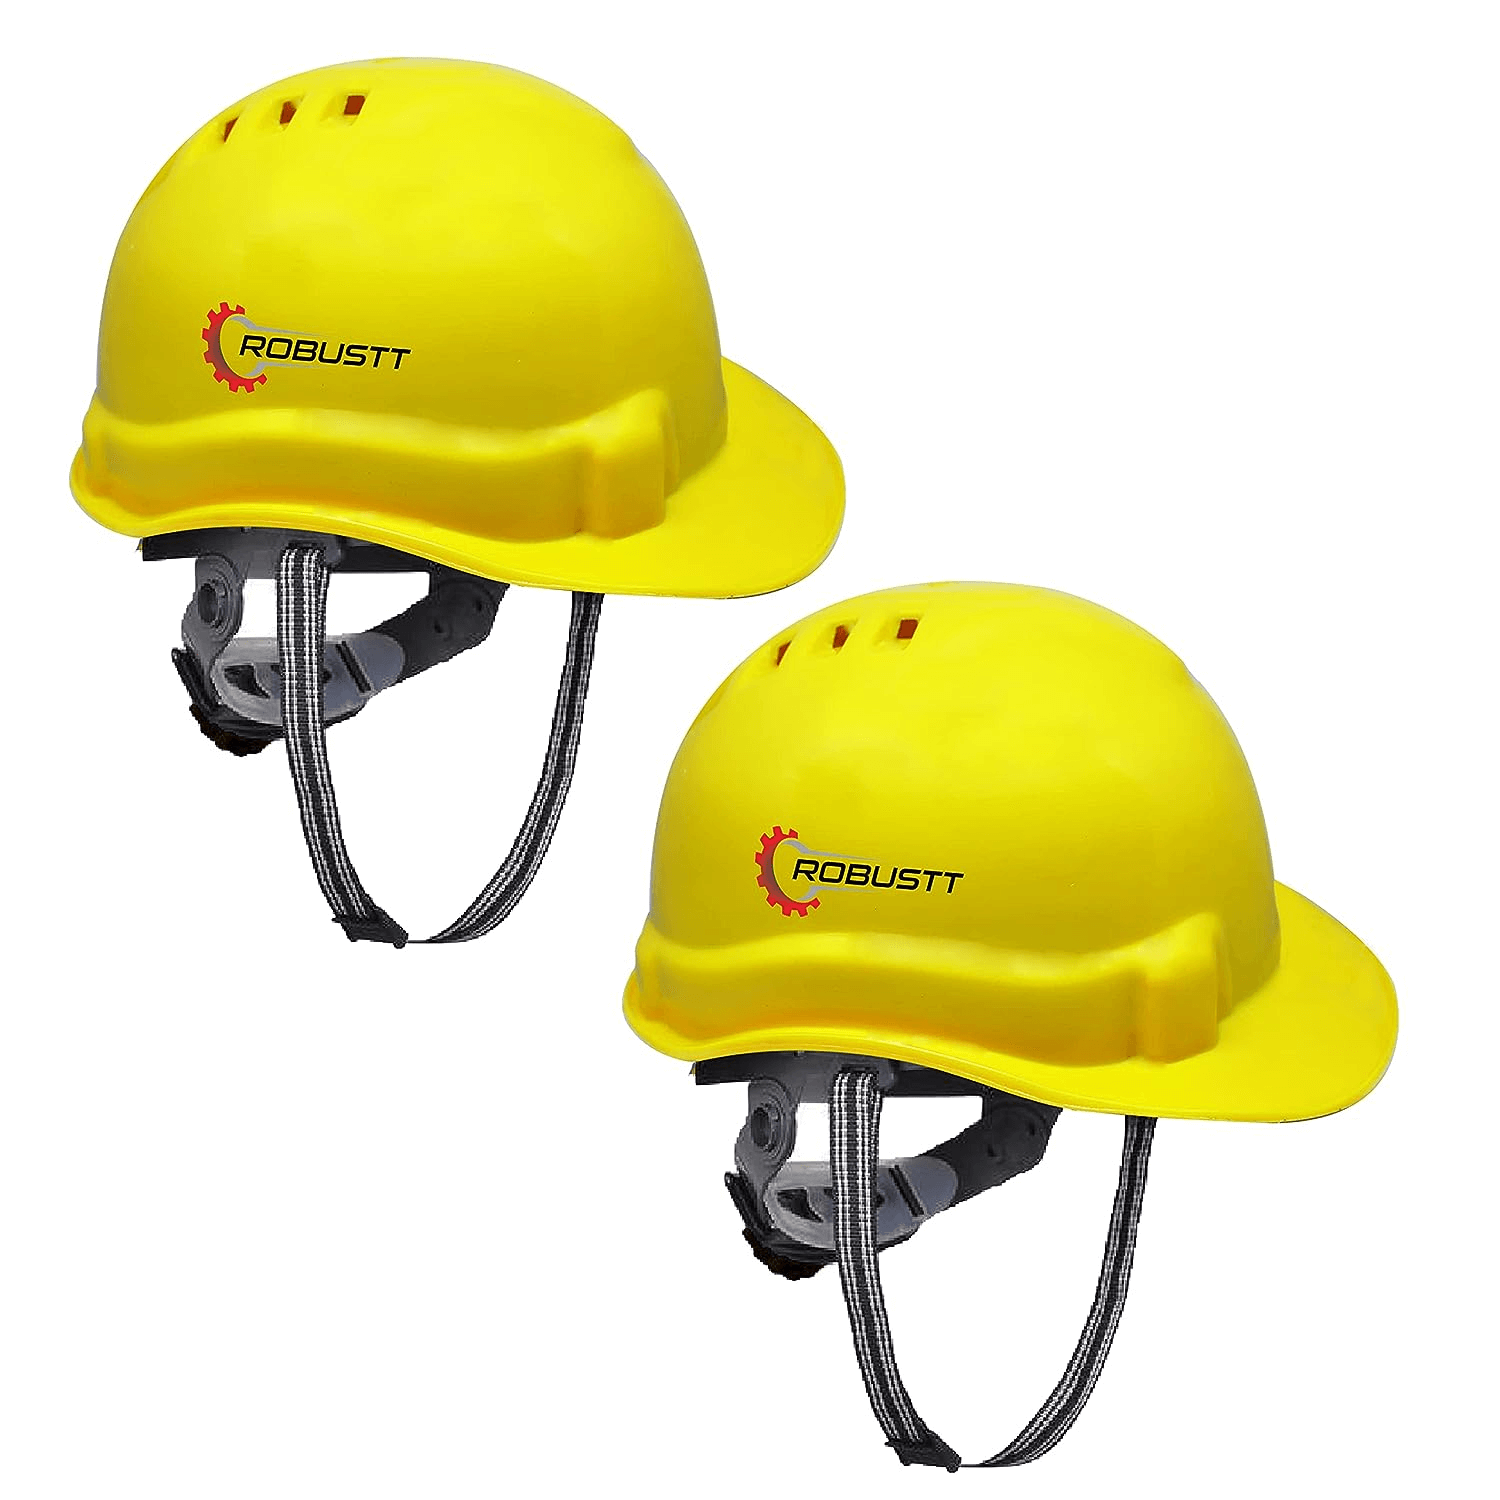 robustt-x-shree-jee-safety-helmet-executive-ratchet-type-adjustment-protection-for-outdoor-work-head-safety-hat-with-sweat-band-yellow-pack-of-2